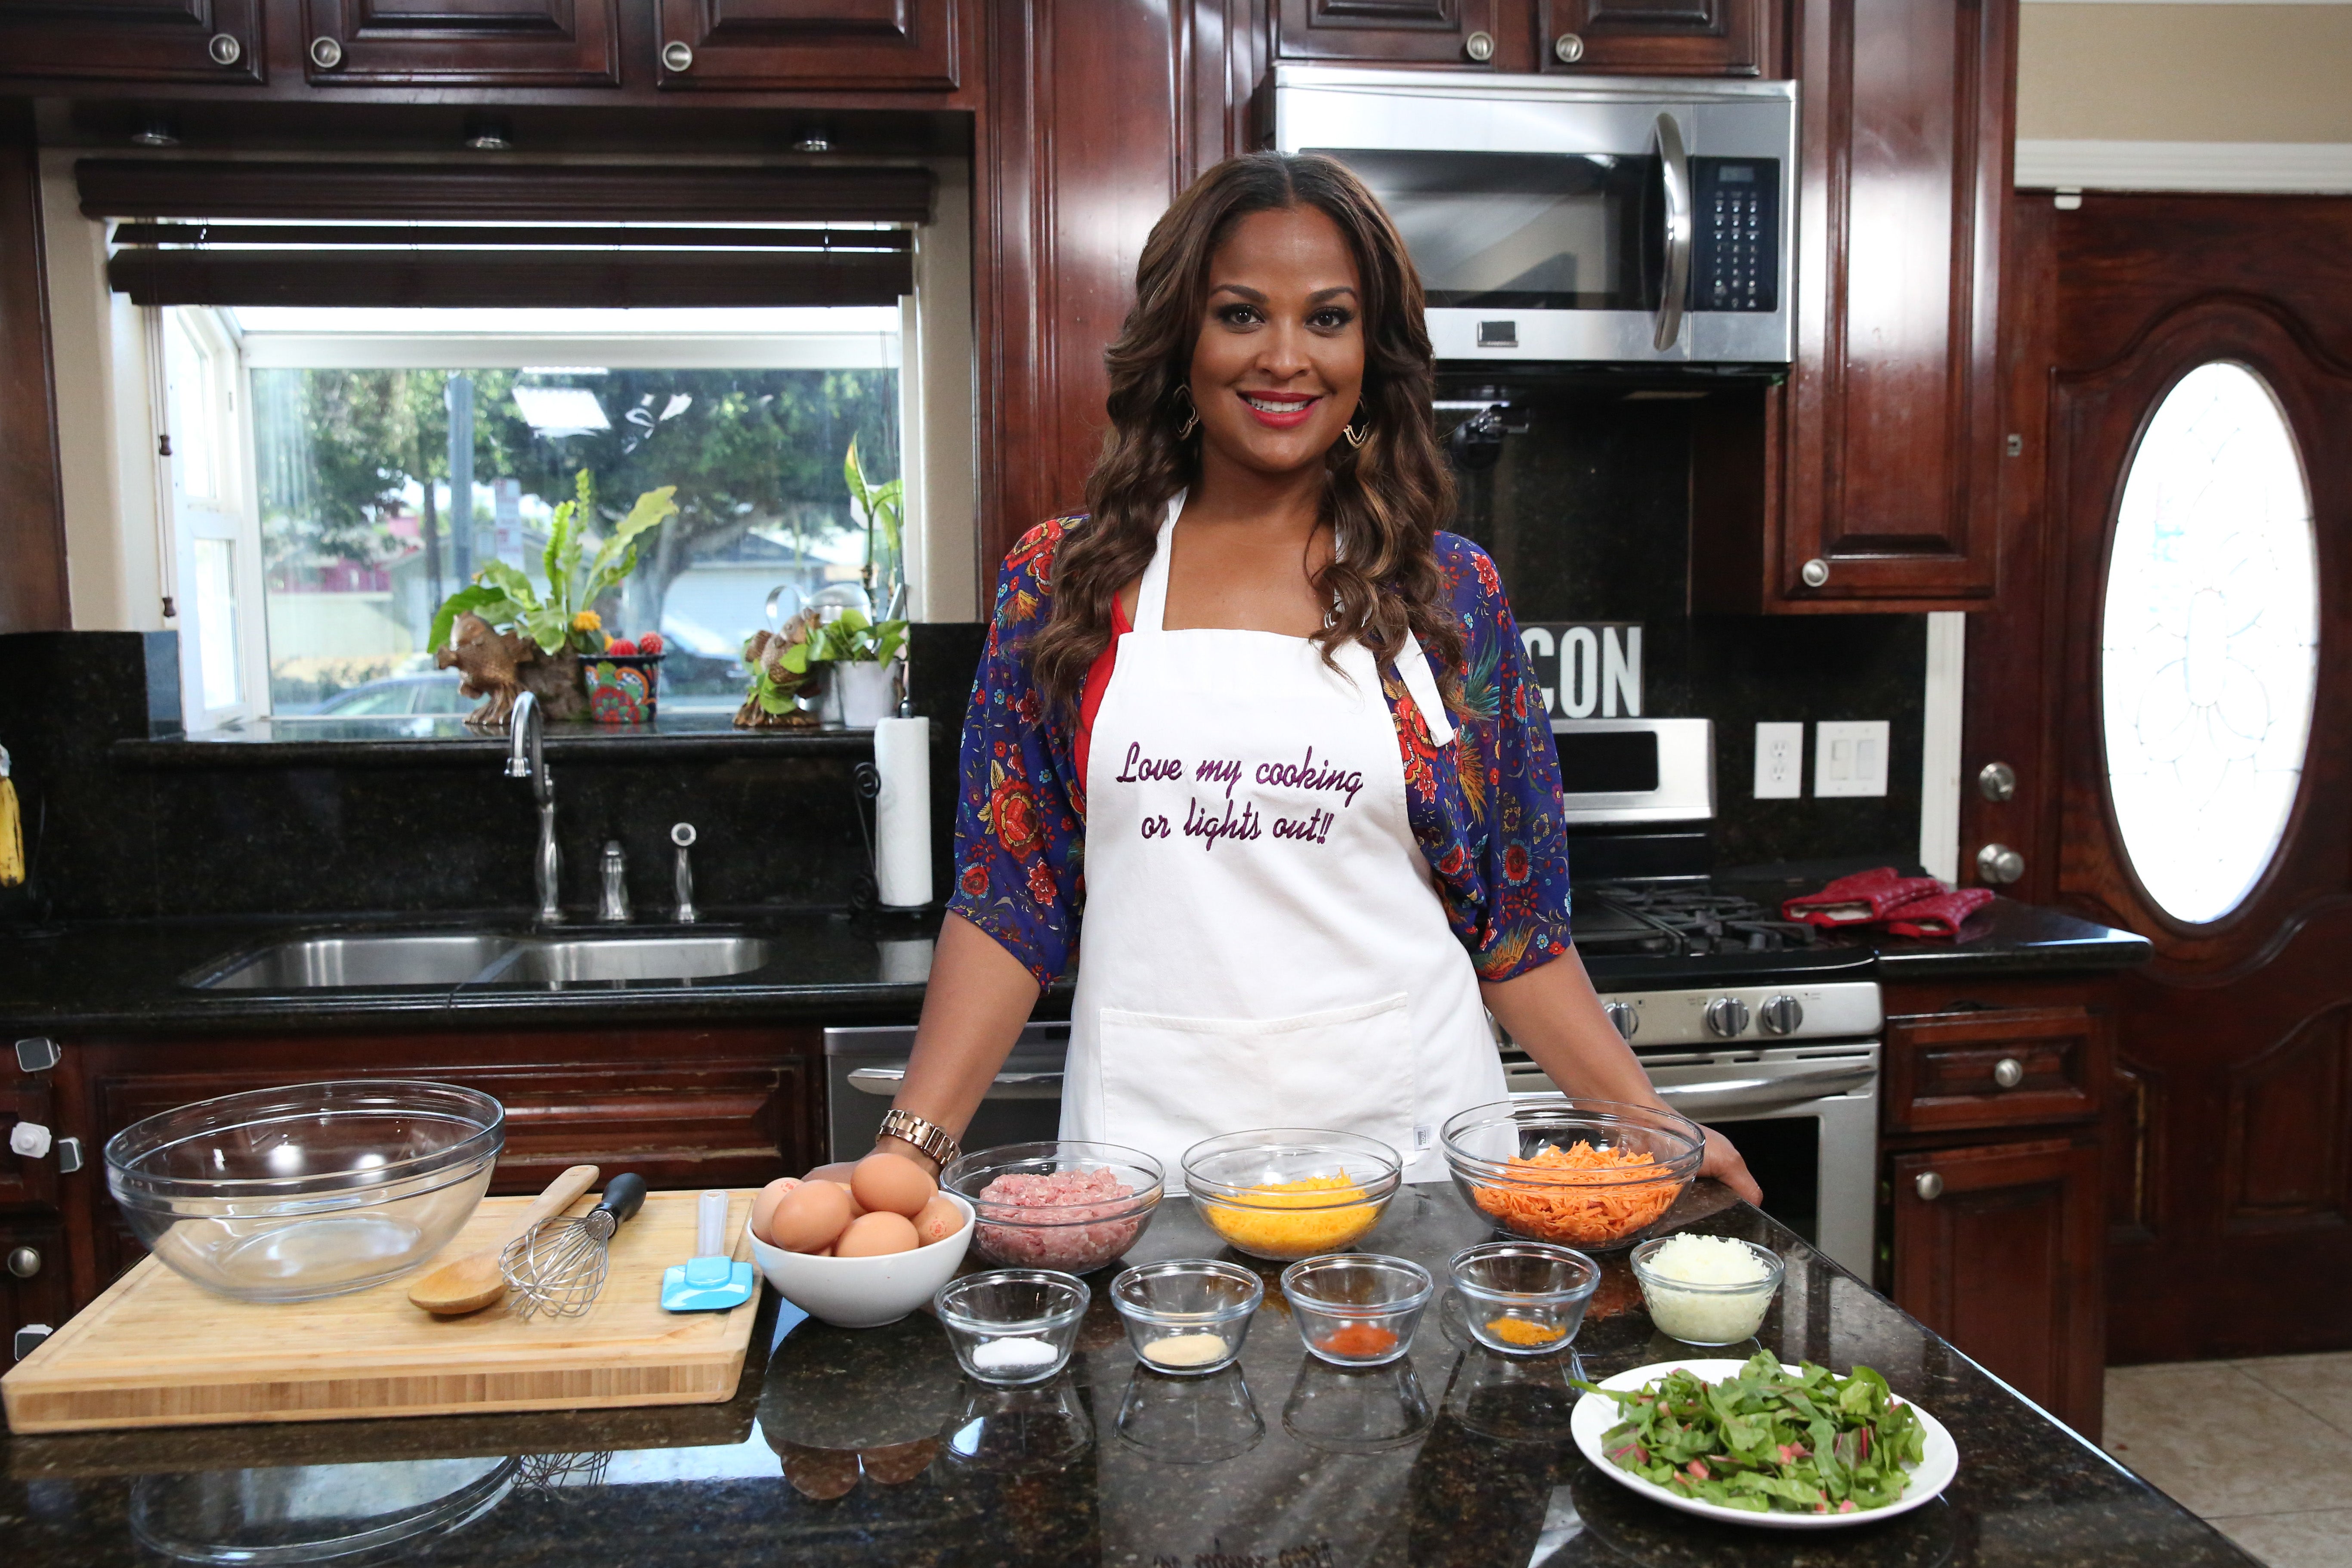 EXCLUSIVE: First Look At Laila Ali As The Host Of OWN's 'Home Made Simple'
